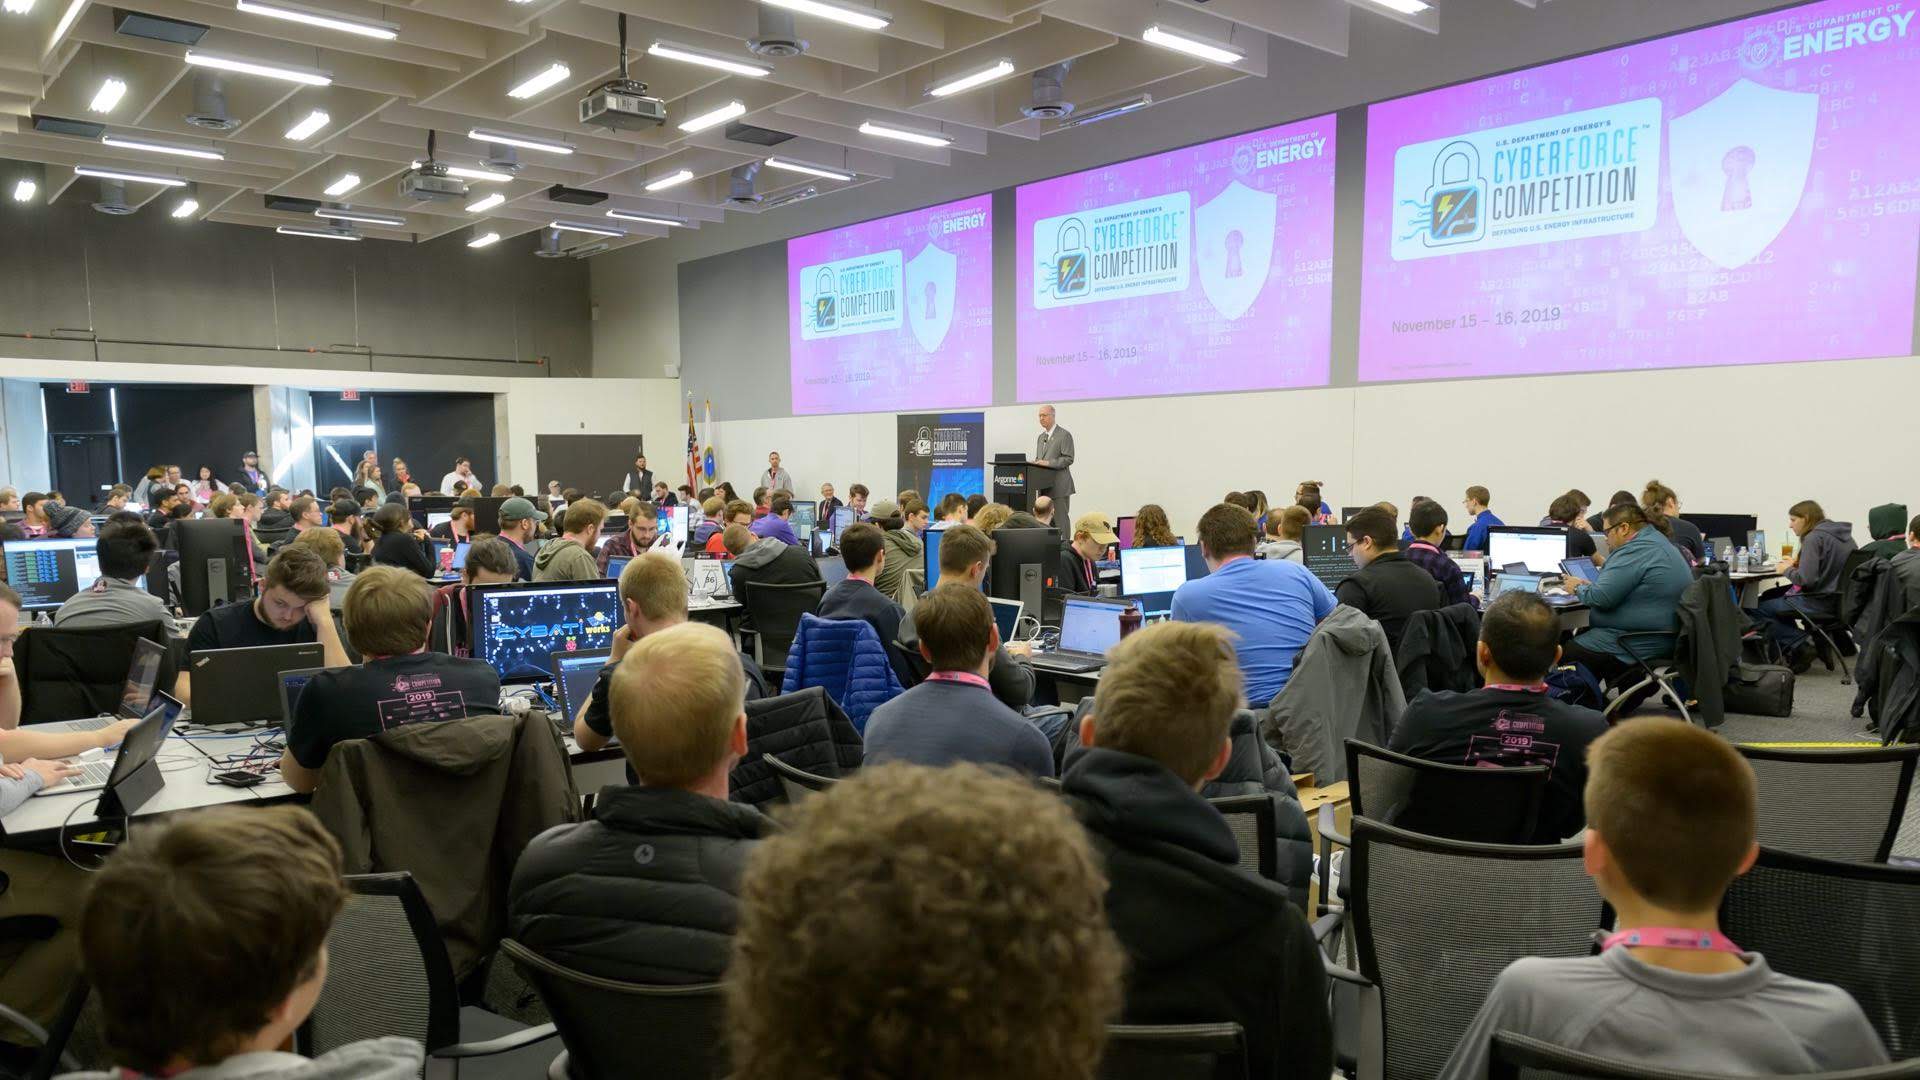 "The KU Jayhackers team competed against 23 other teams in Chicago."